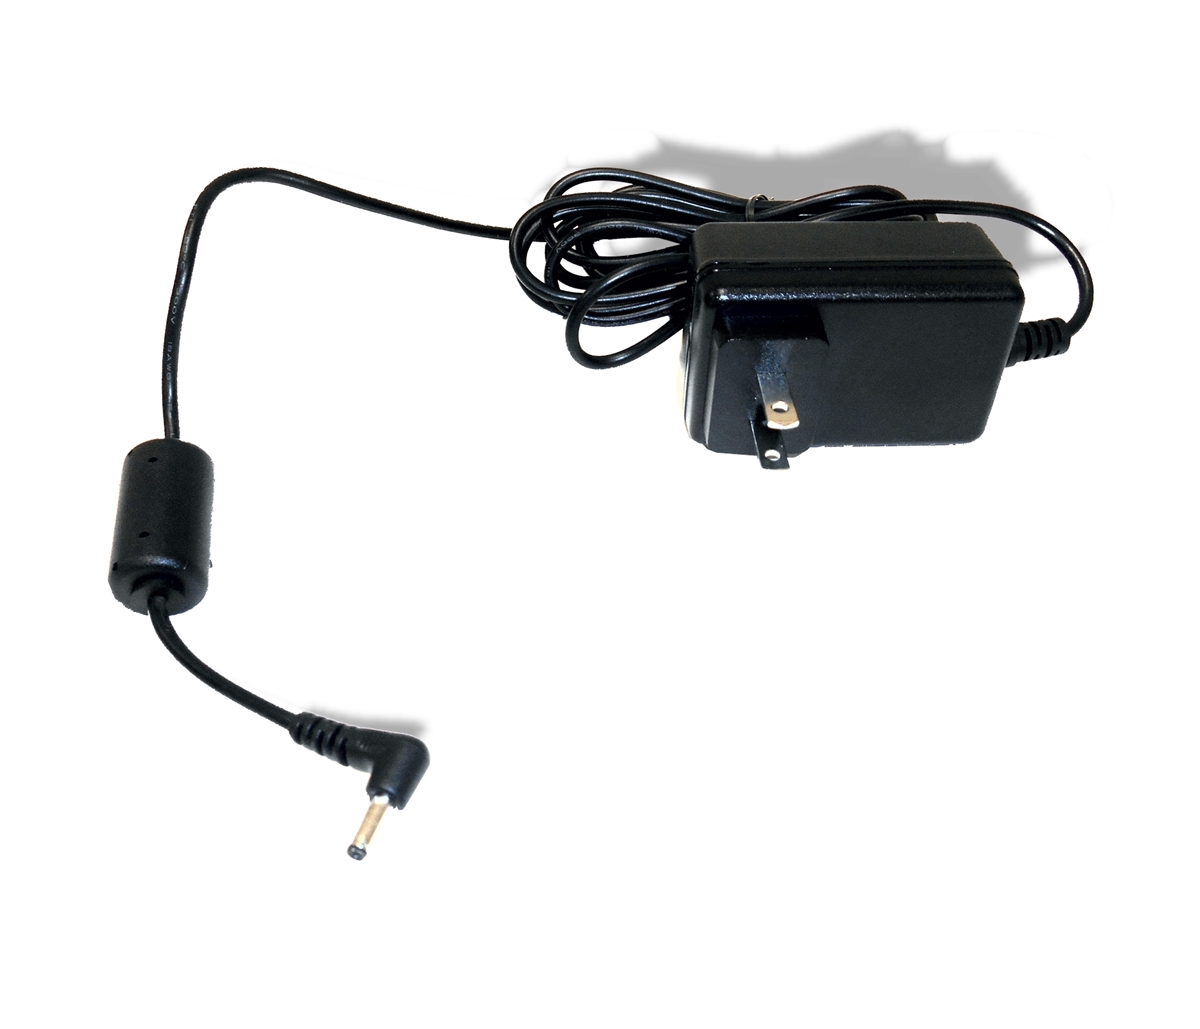 Power Supply for 24-Inch Under-Cabinet Cubicle LED Task Light for Cubicles  and Office Furniture